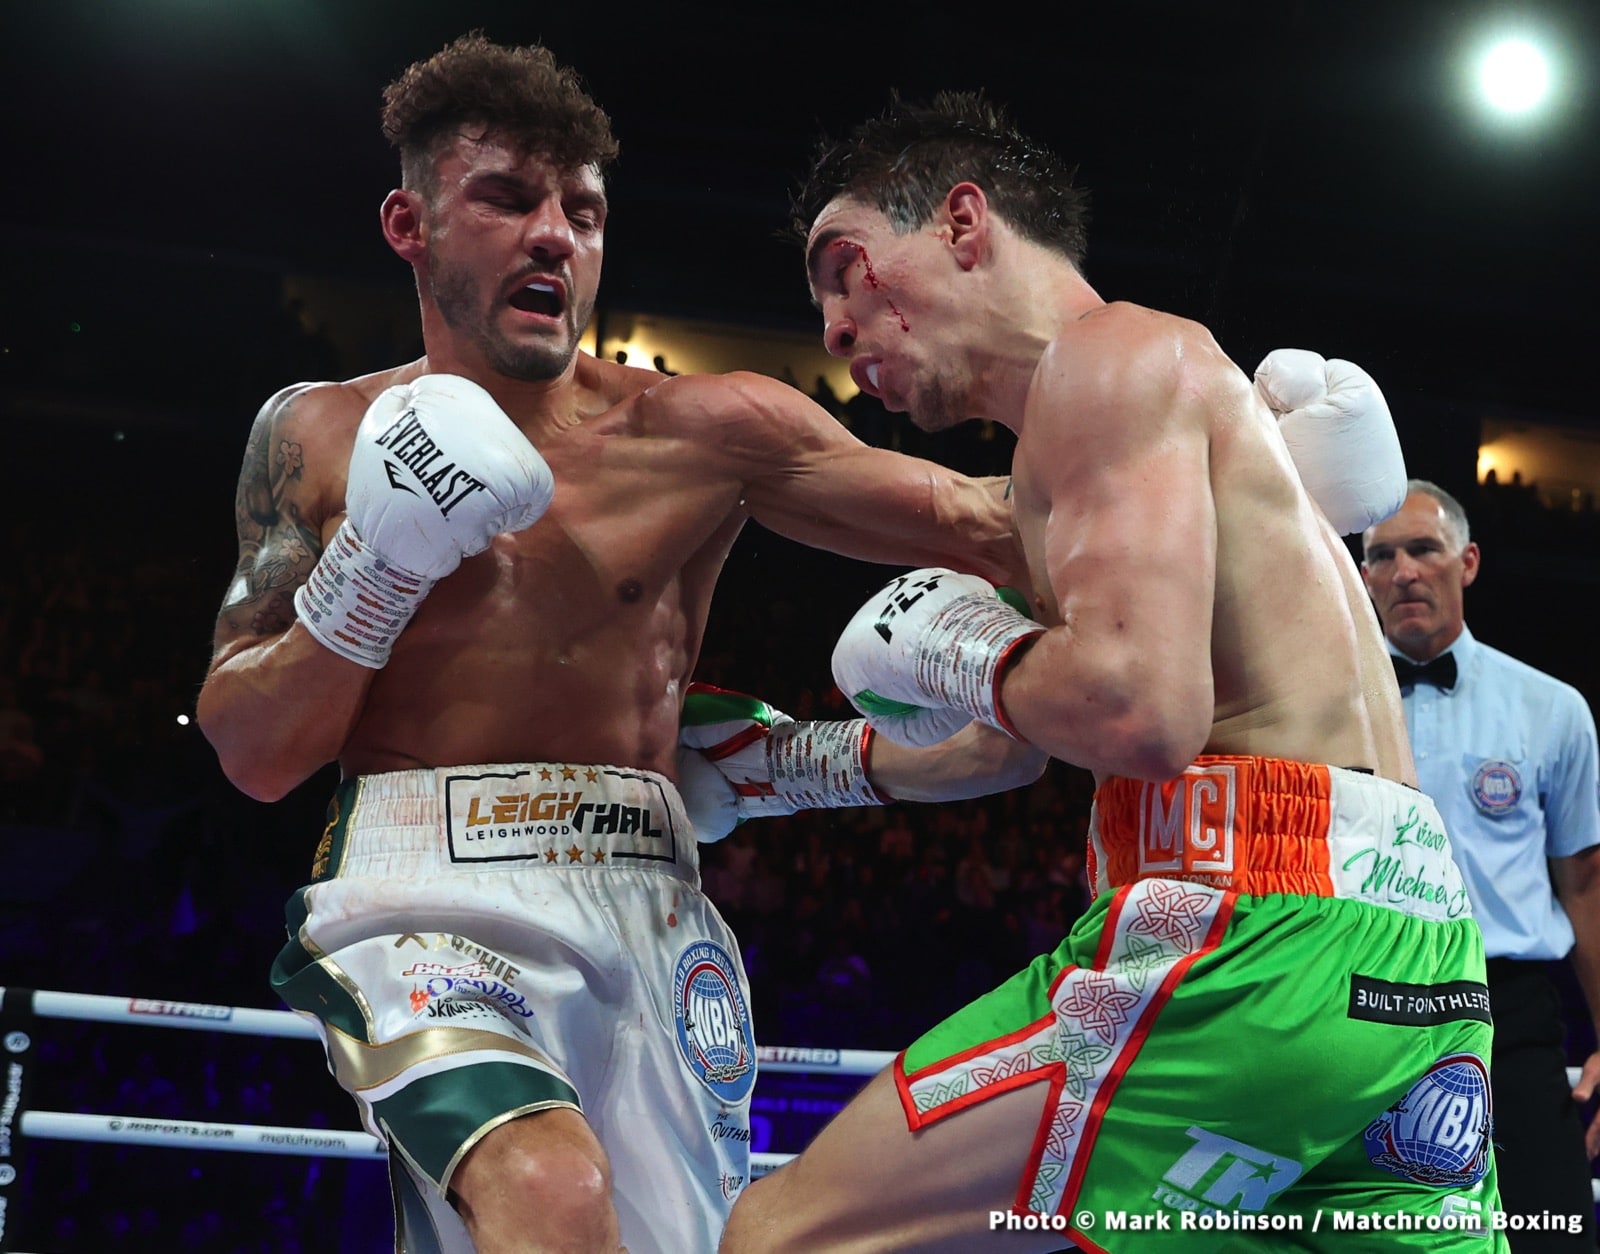 Image: Michael Conlan asking for rematch against Leigh Wood